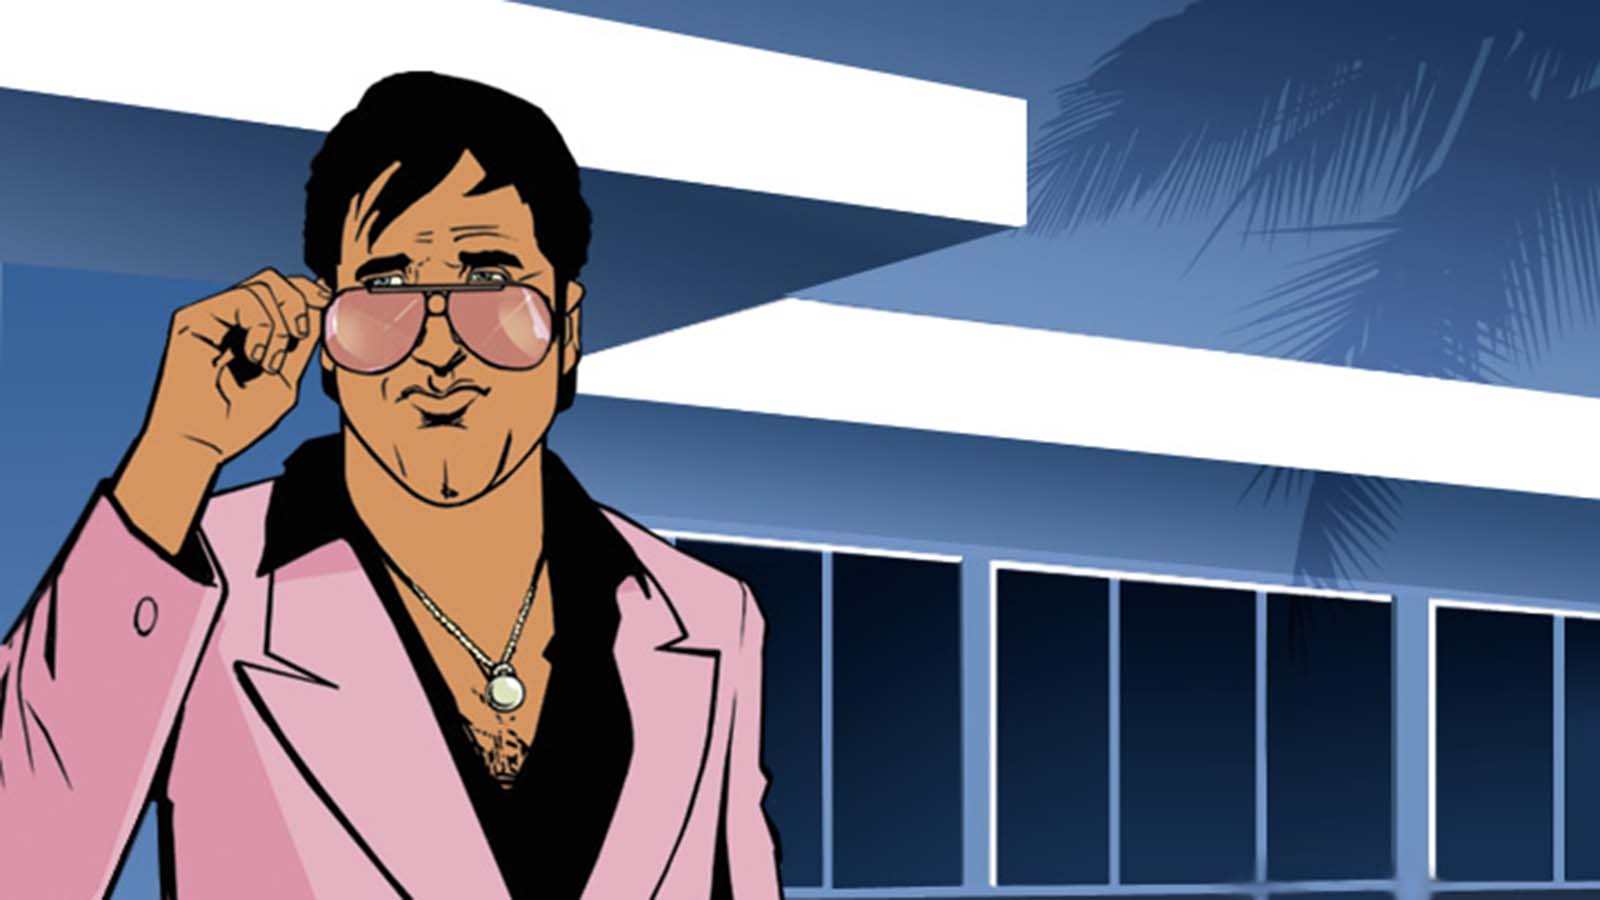 Sonny standing in front of a Vice City luxury house in distinctive GTA art style